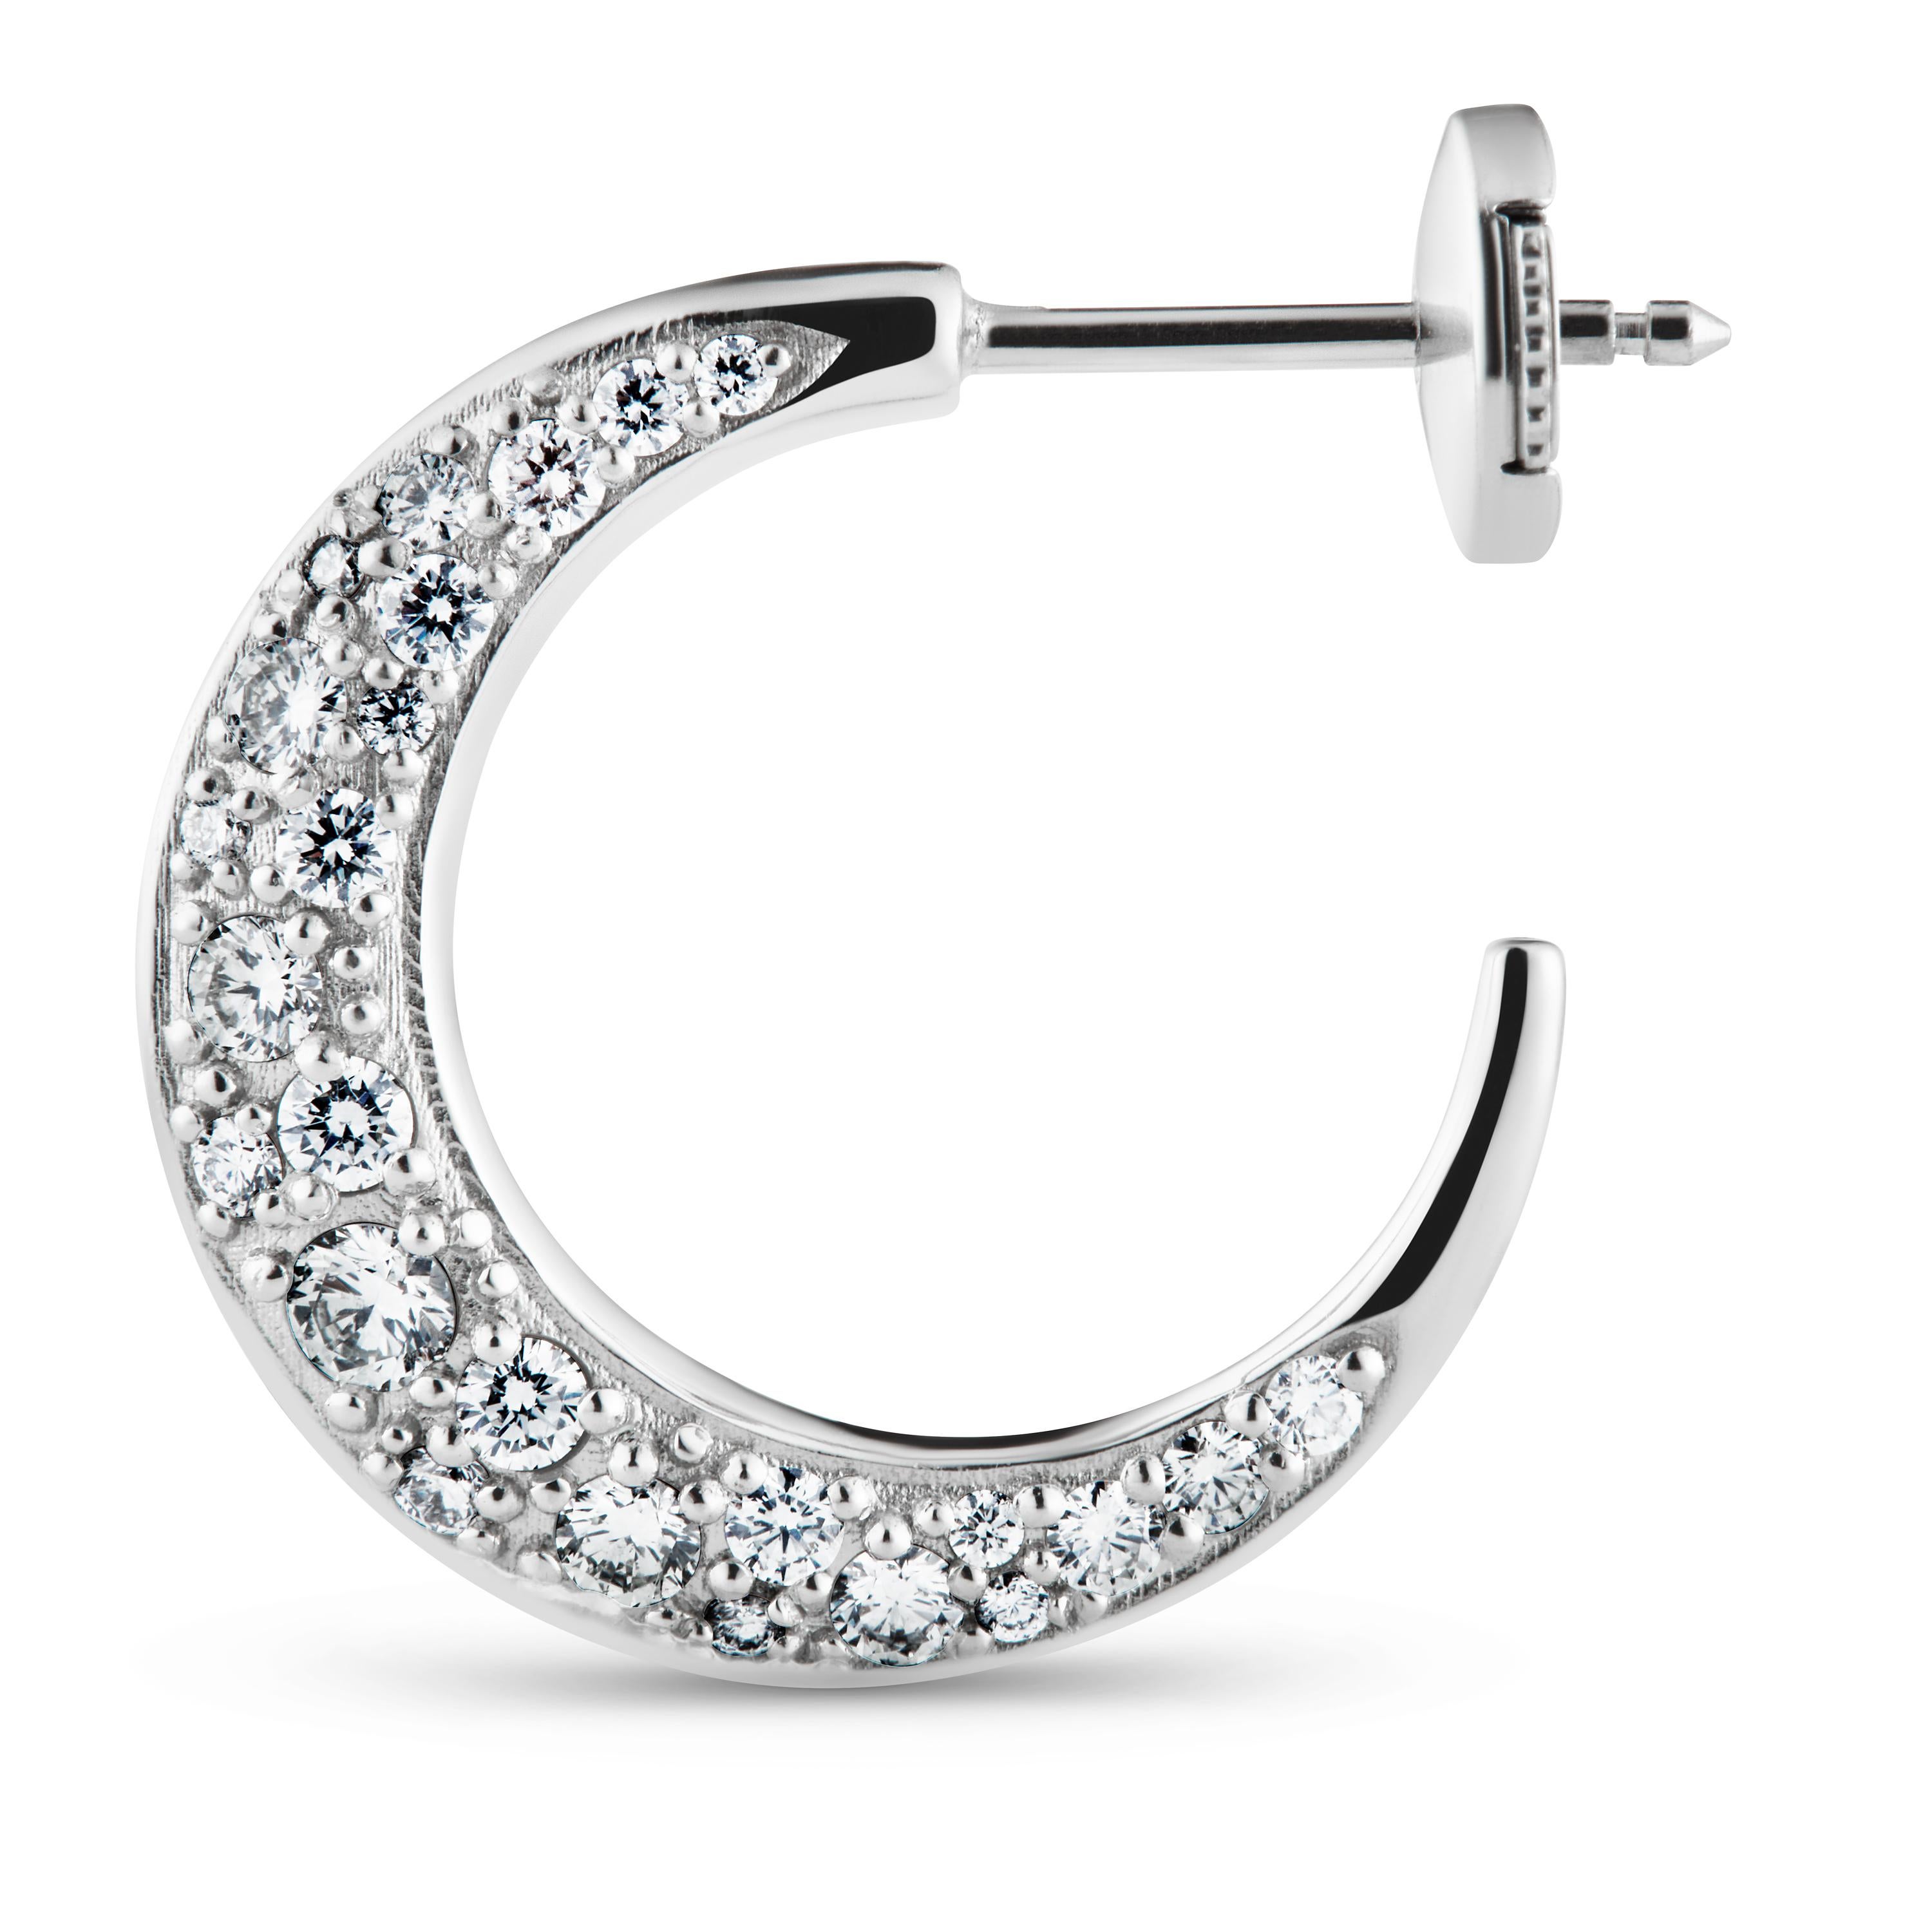 Diamond Hoops in 18kt white gold is set with 50, a total of 0.75 carat, brilliant cut traceable diamonds.

Each of the 50 diamonds are hand set so they underline the shape of the earring providing the perfect sparkle and light reflection. 

All